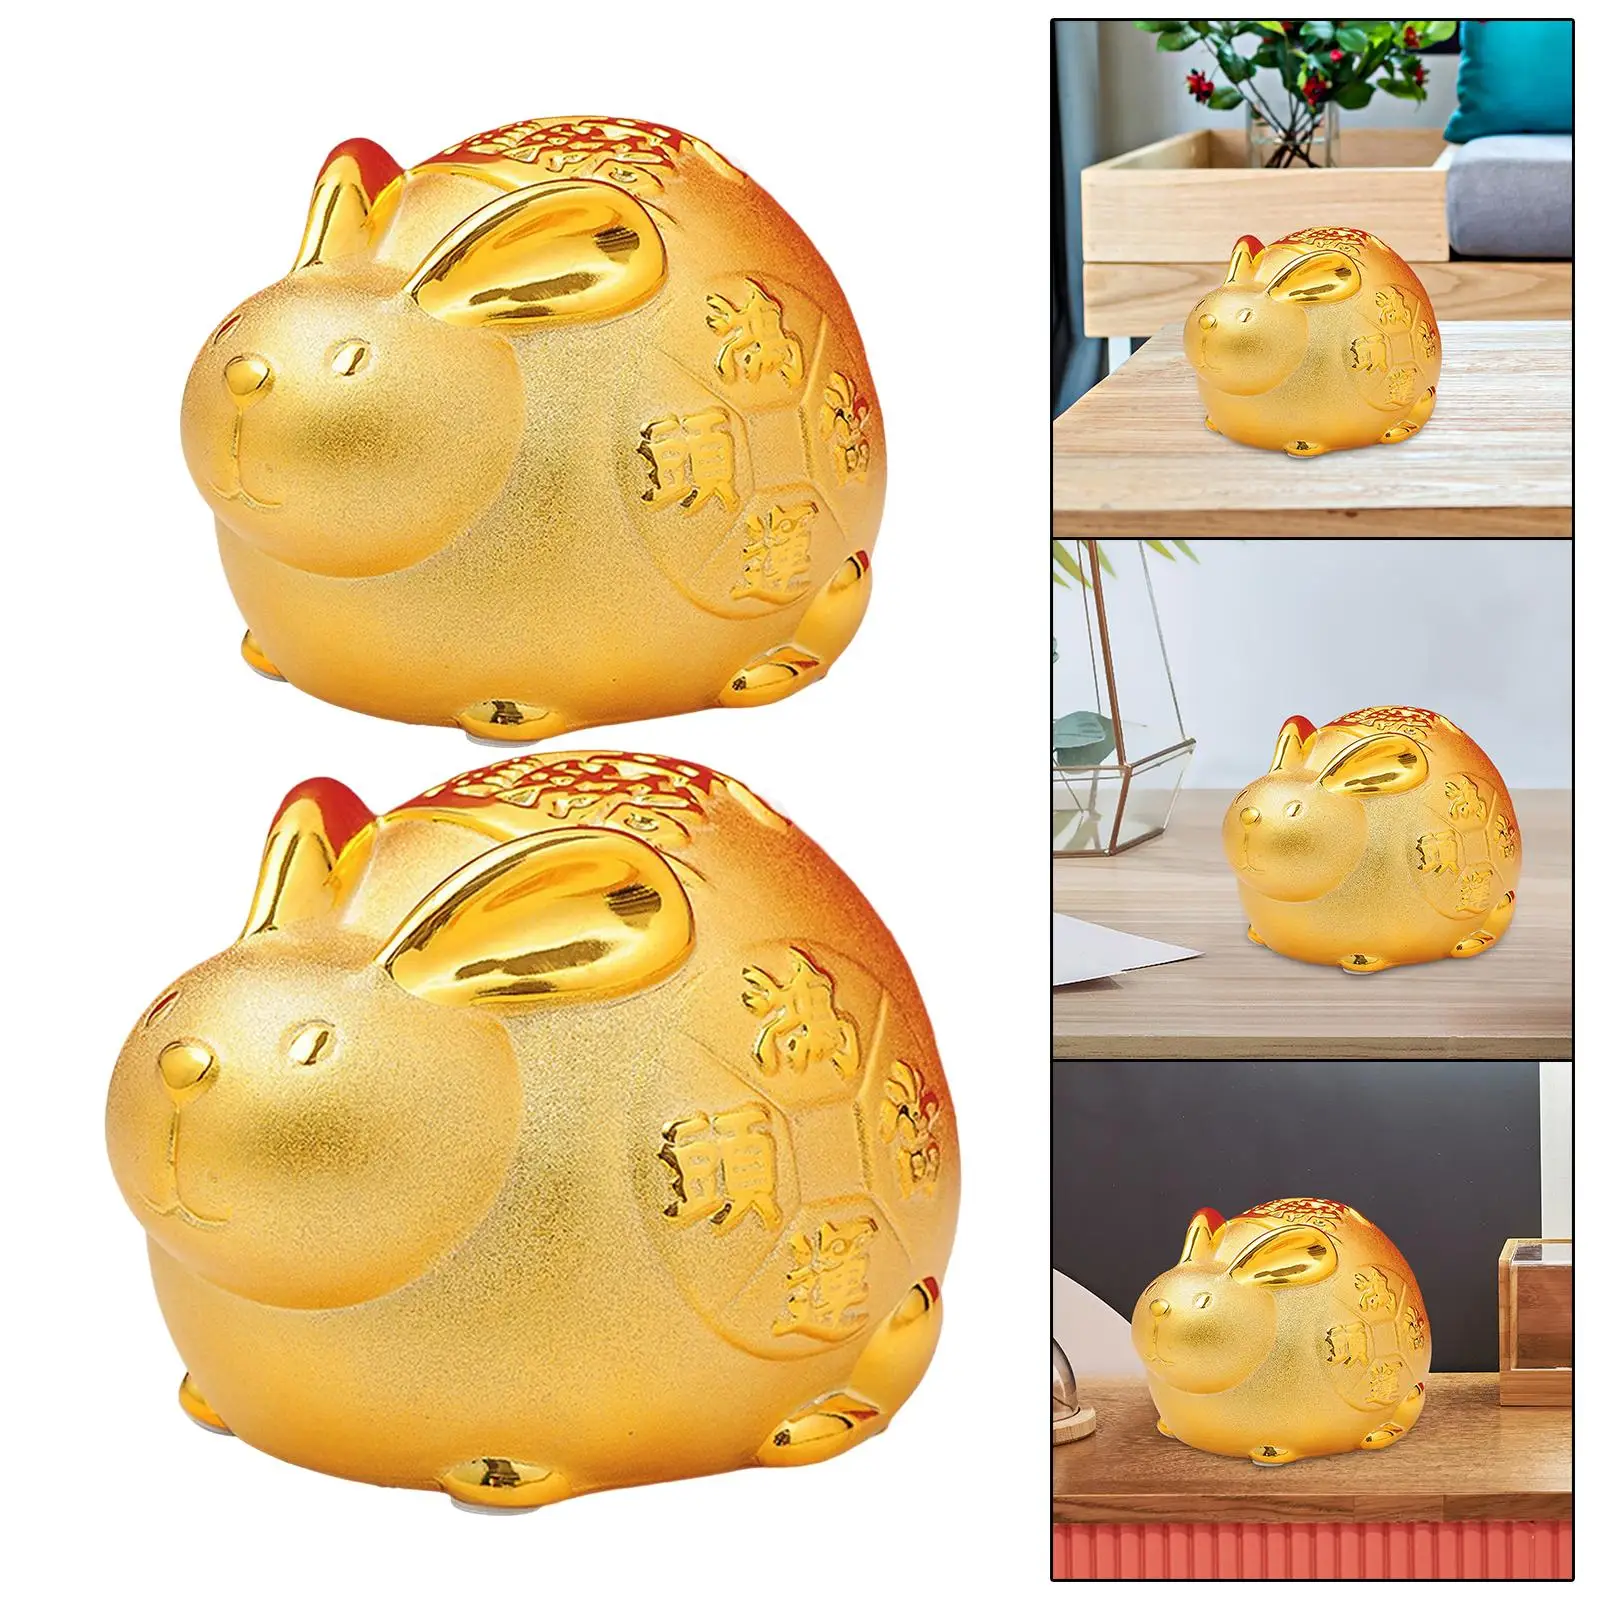 Porcelain Lucky Rabbit Money Bank Animal Figurine Collectible Statue Ornaments Tabletop for Office Festival Children`s Bedroom